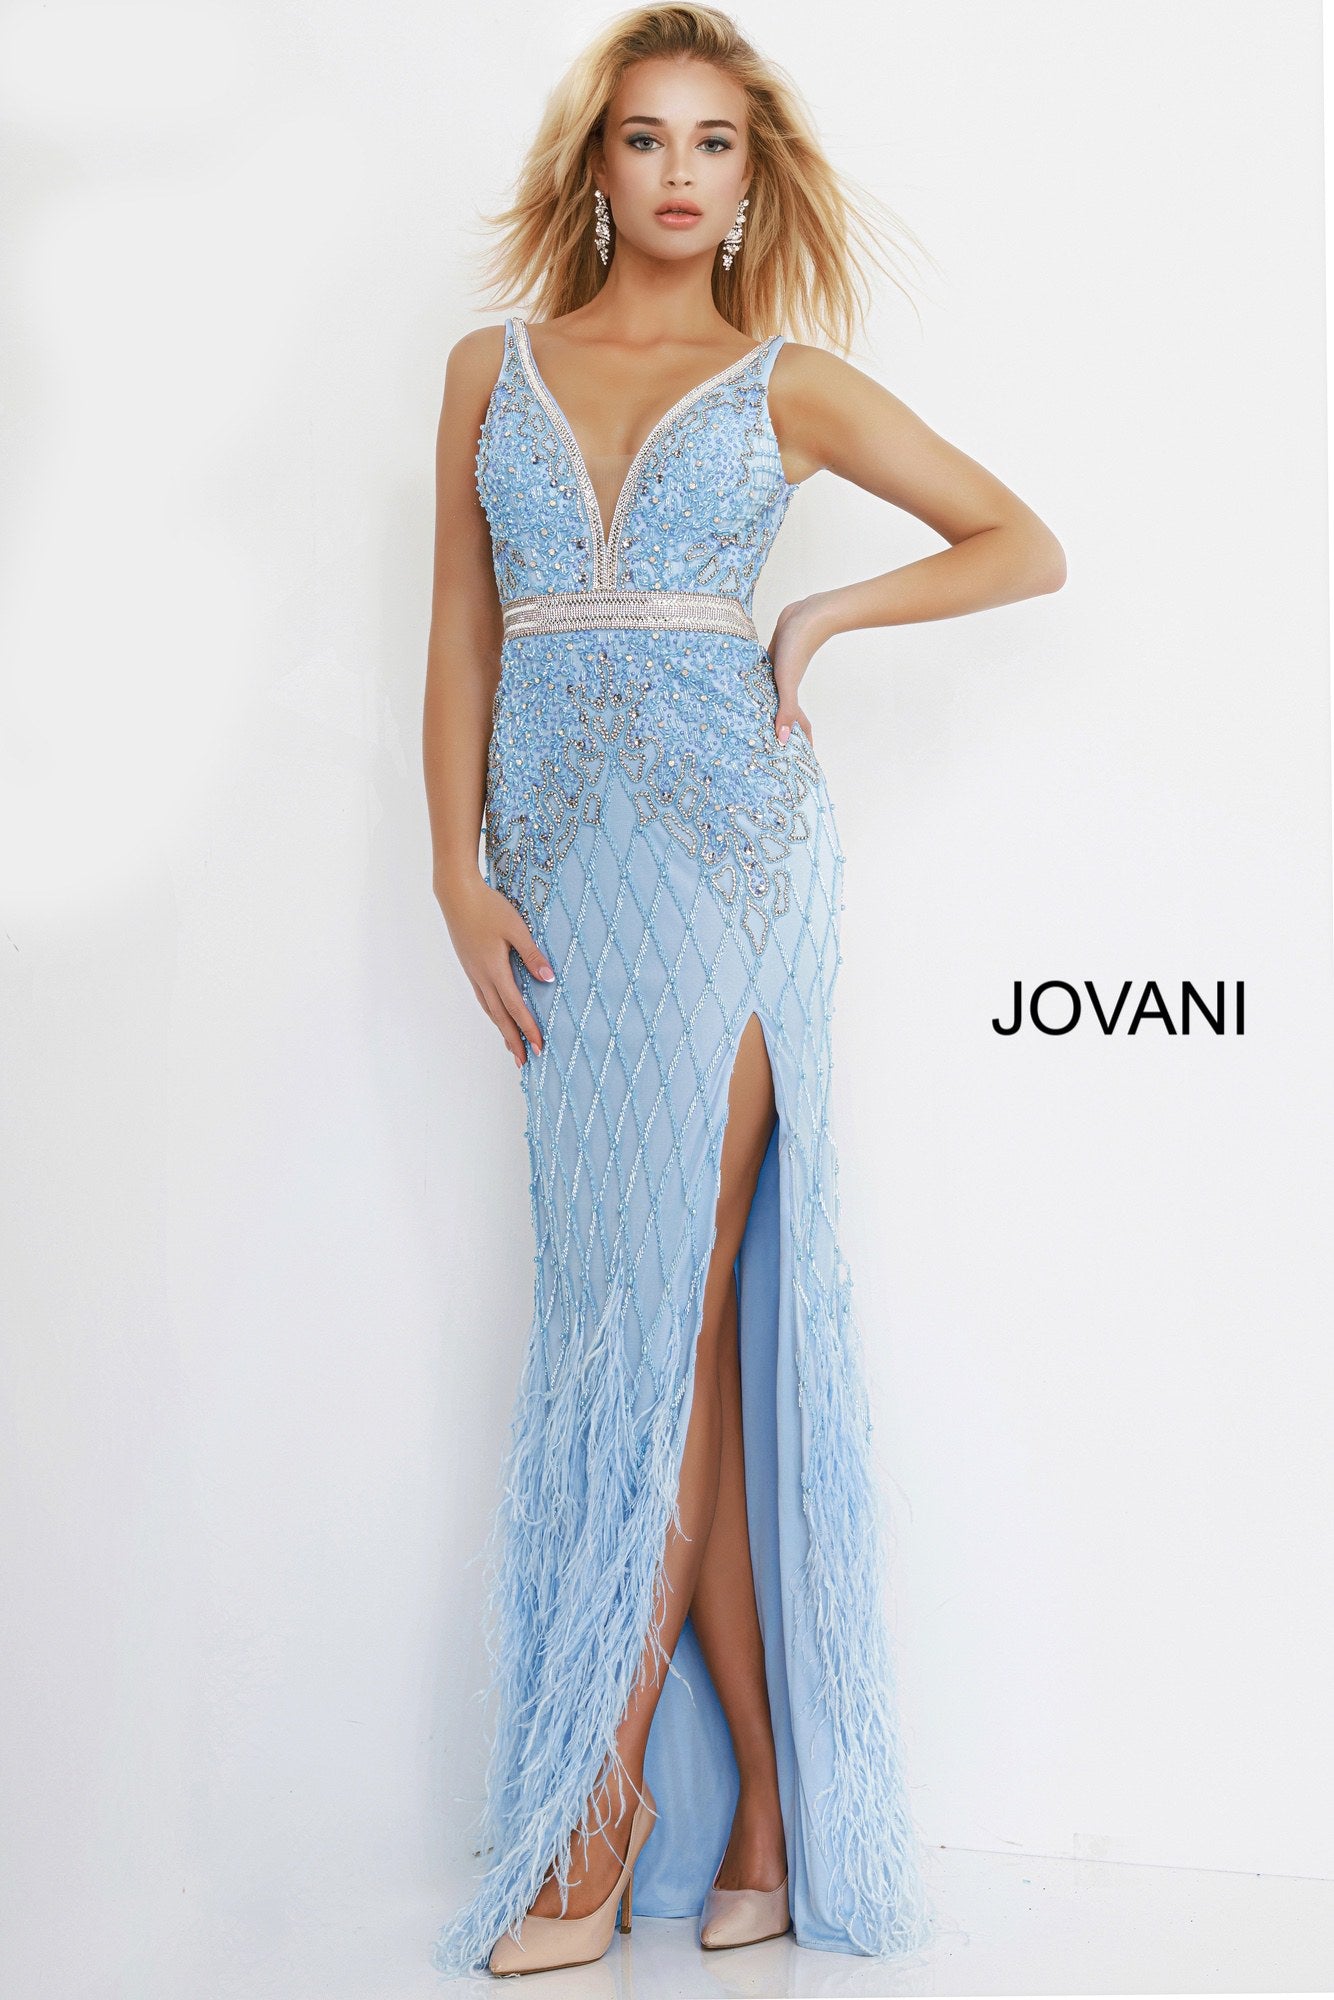 Jovani 55796 embellished prom dress pageant gown with feather skirt v neckline. 